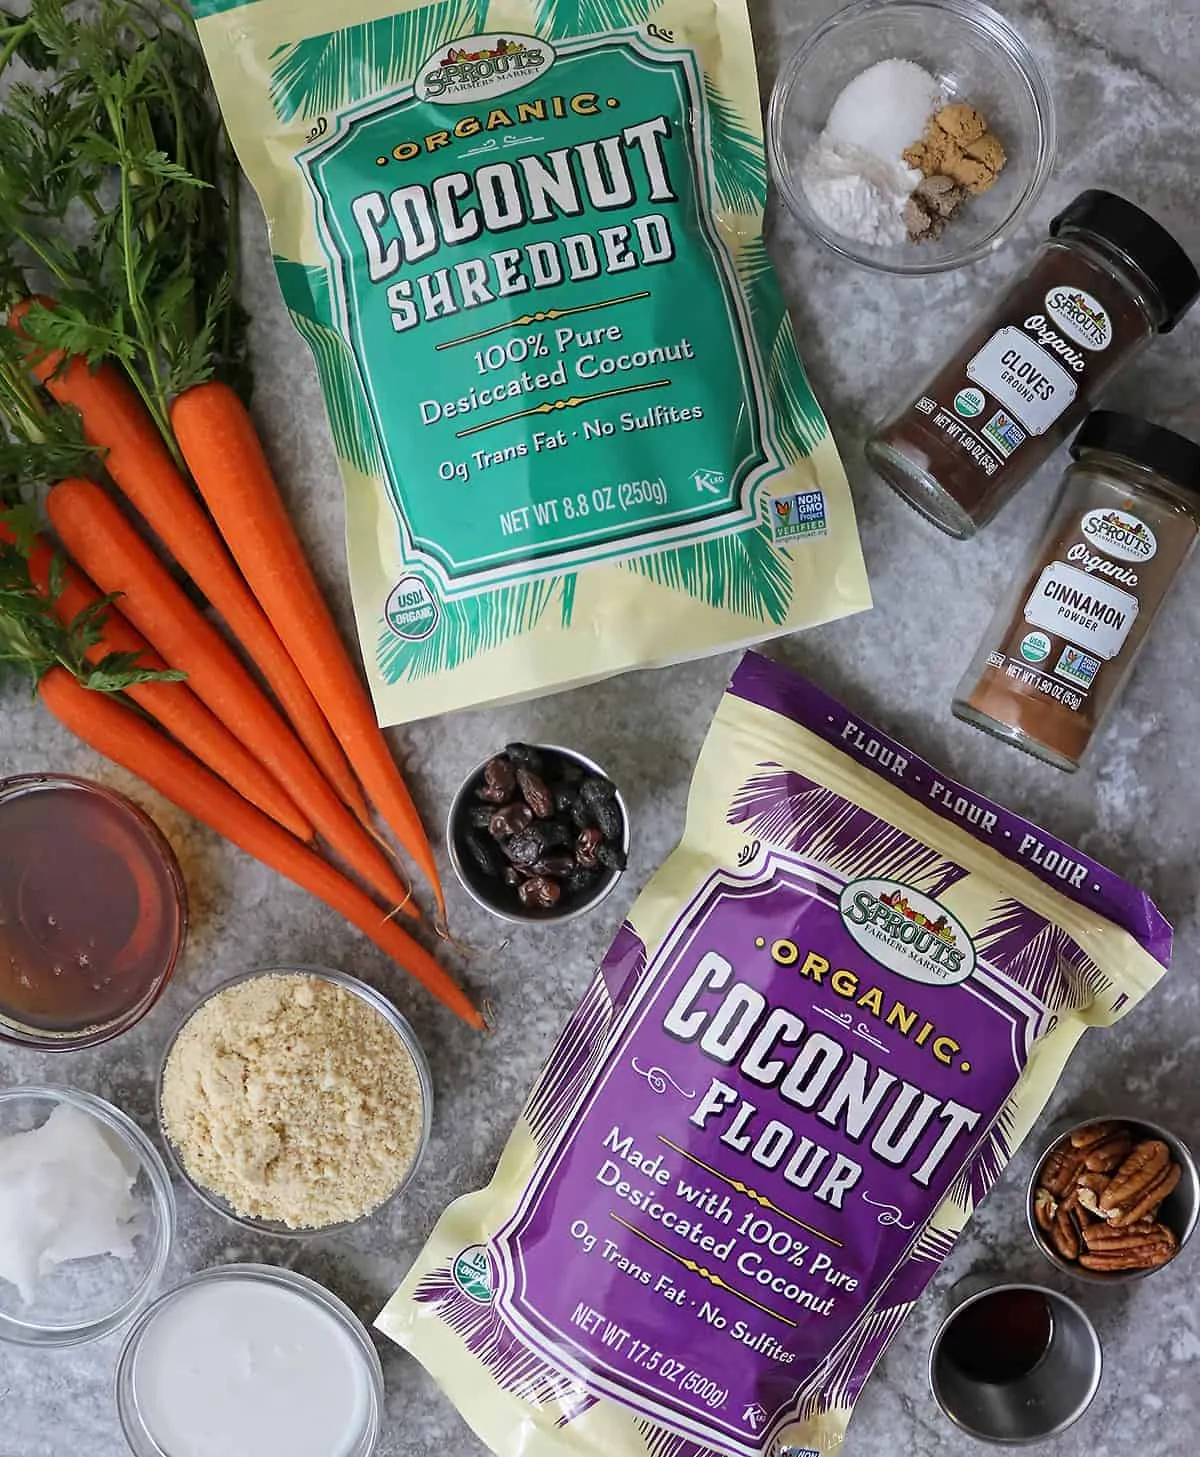 Ingredients from Sprouts to make paleo carrot cake bars